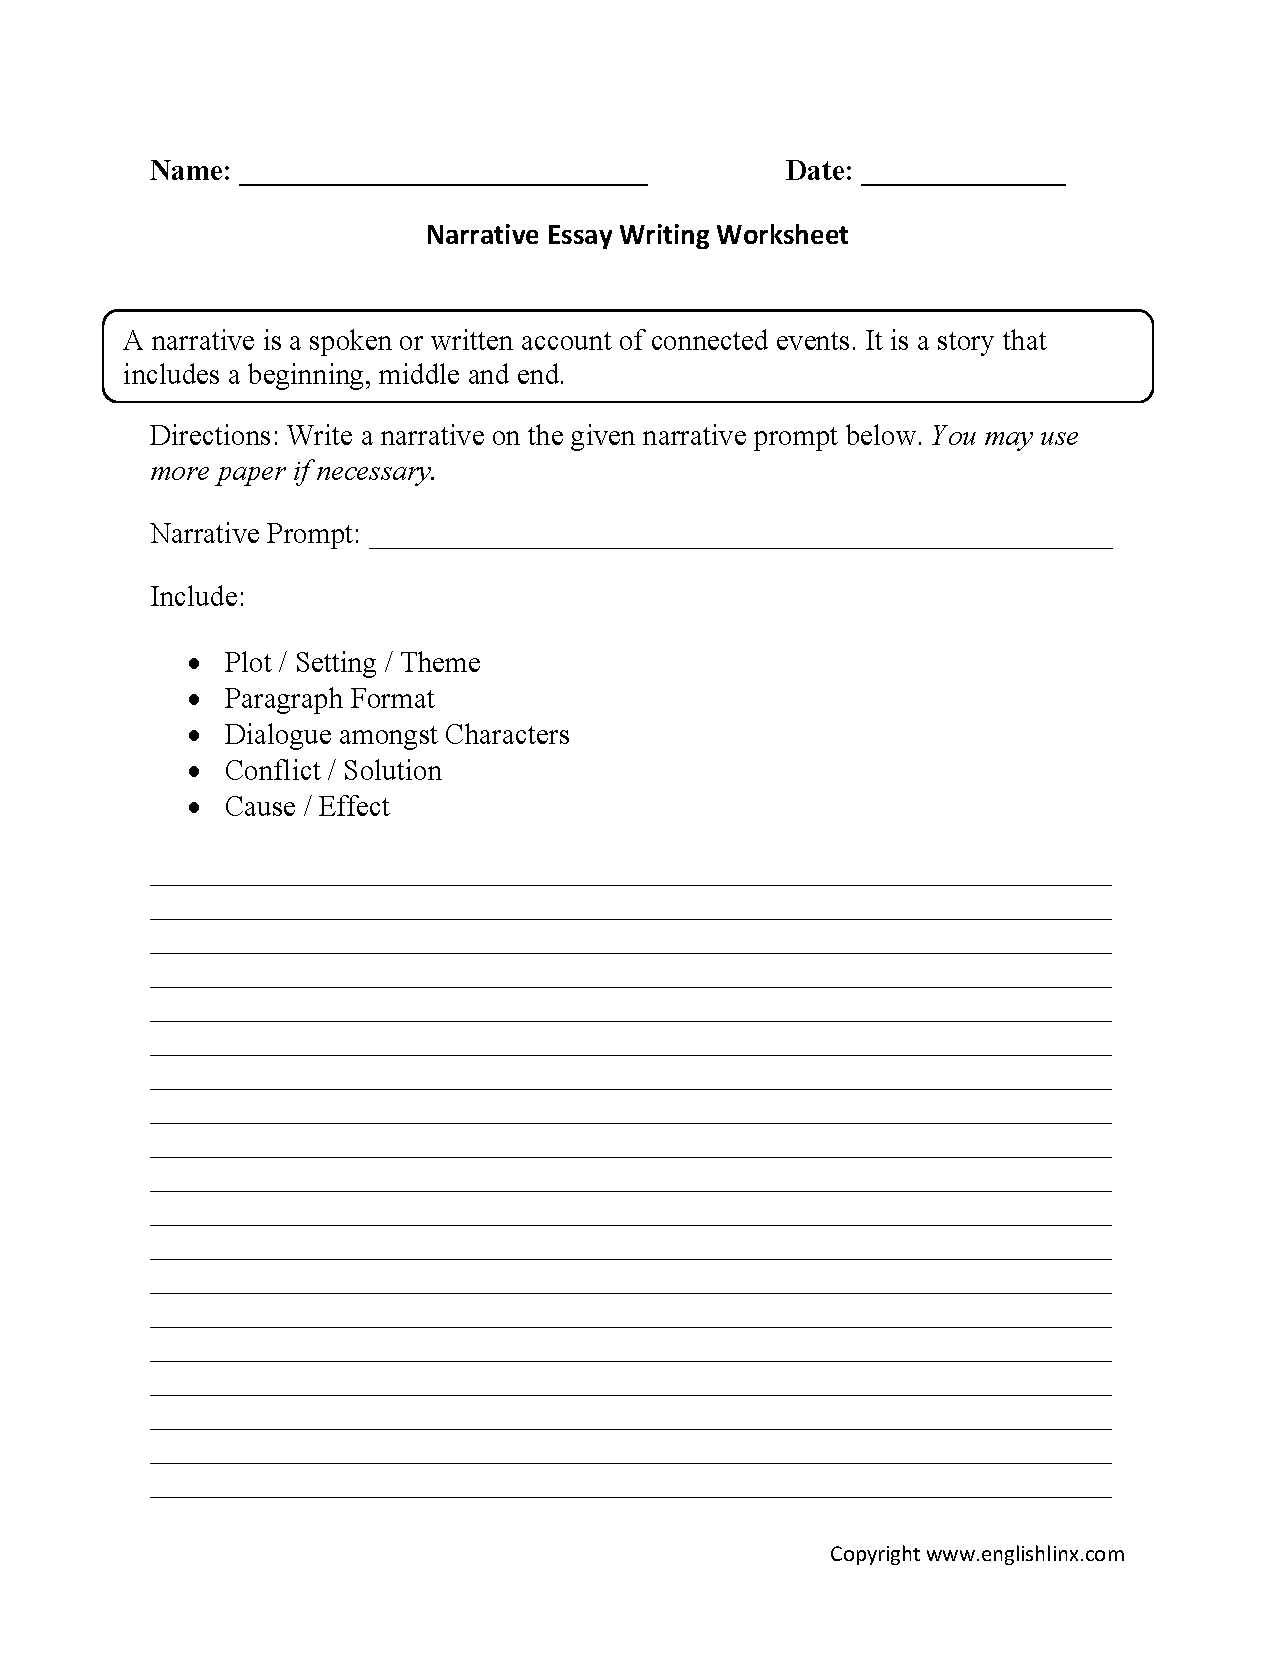 Paragraph Writing Worksheets Along with Term Papers Writing Help